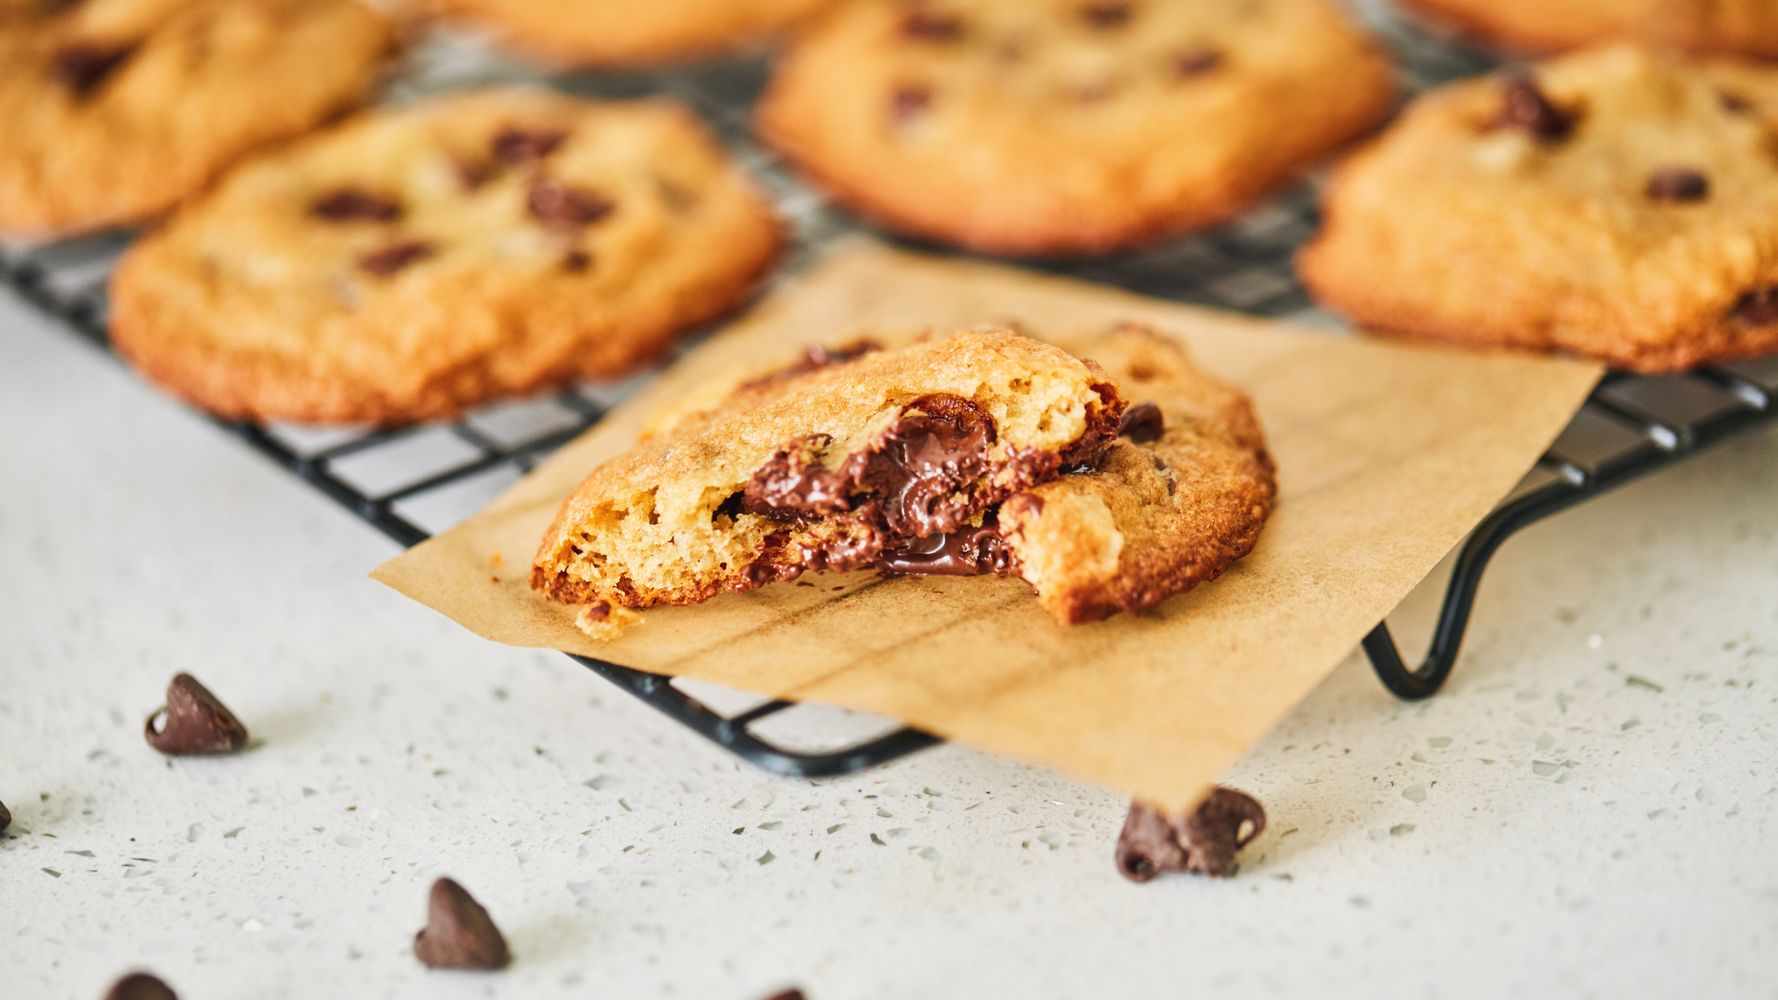 The Best Chocolate For Chocolate Chip Cookies, According To Experts